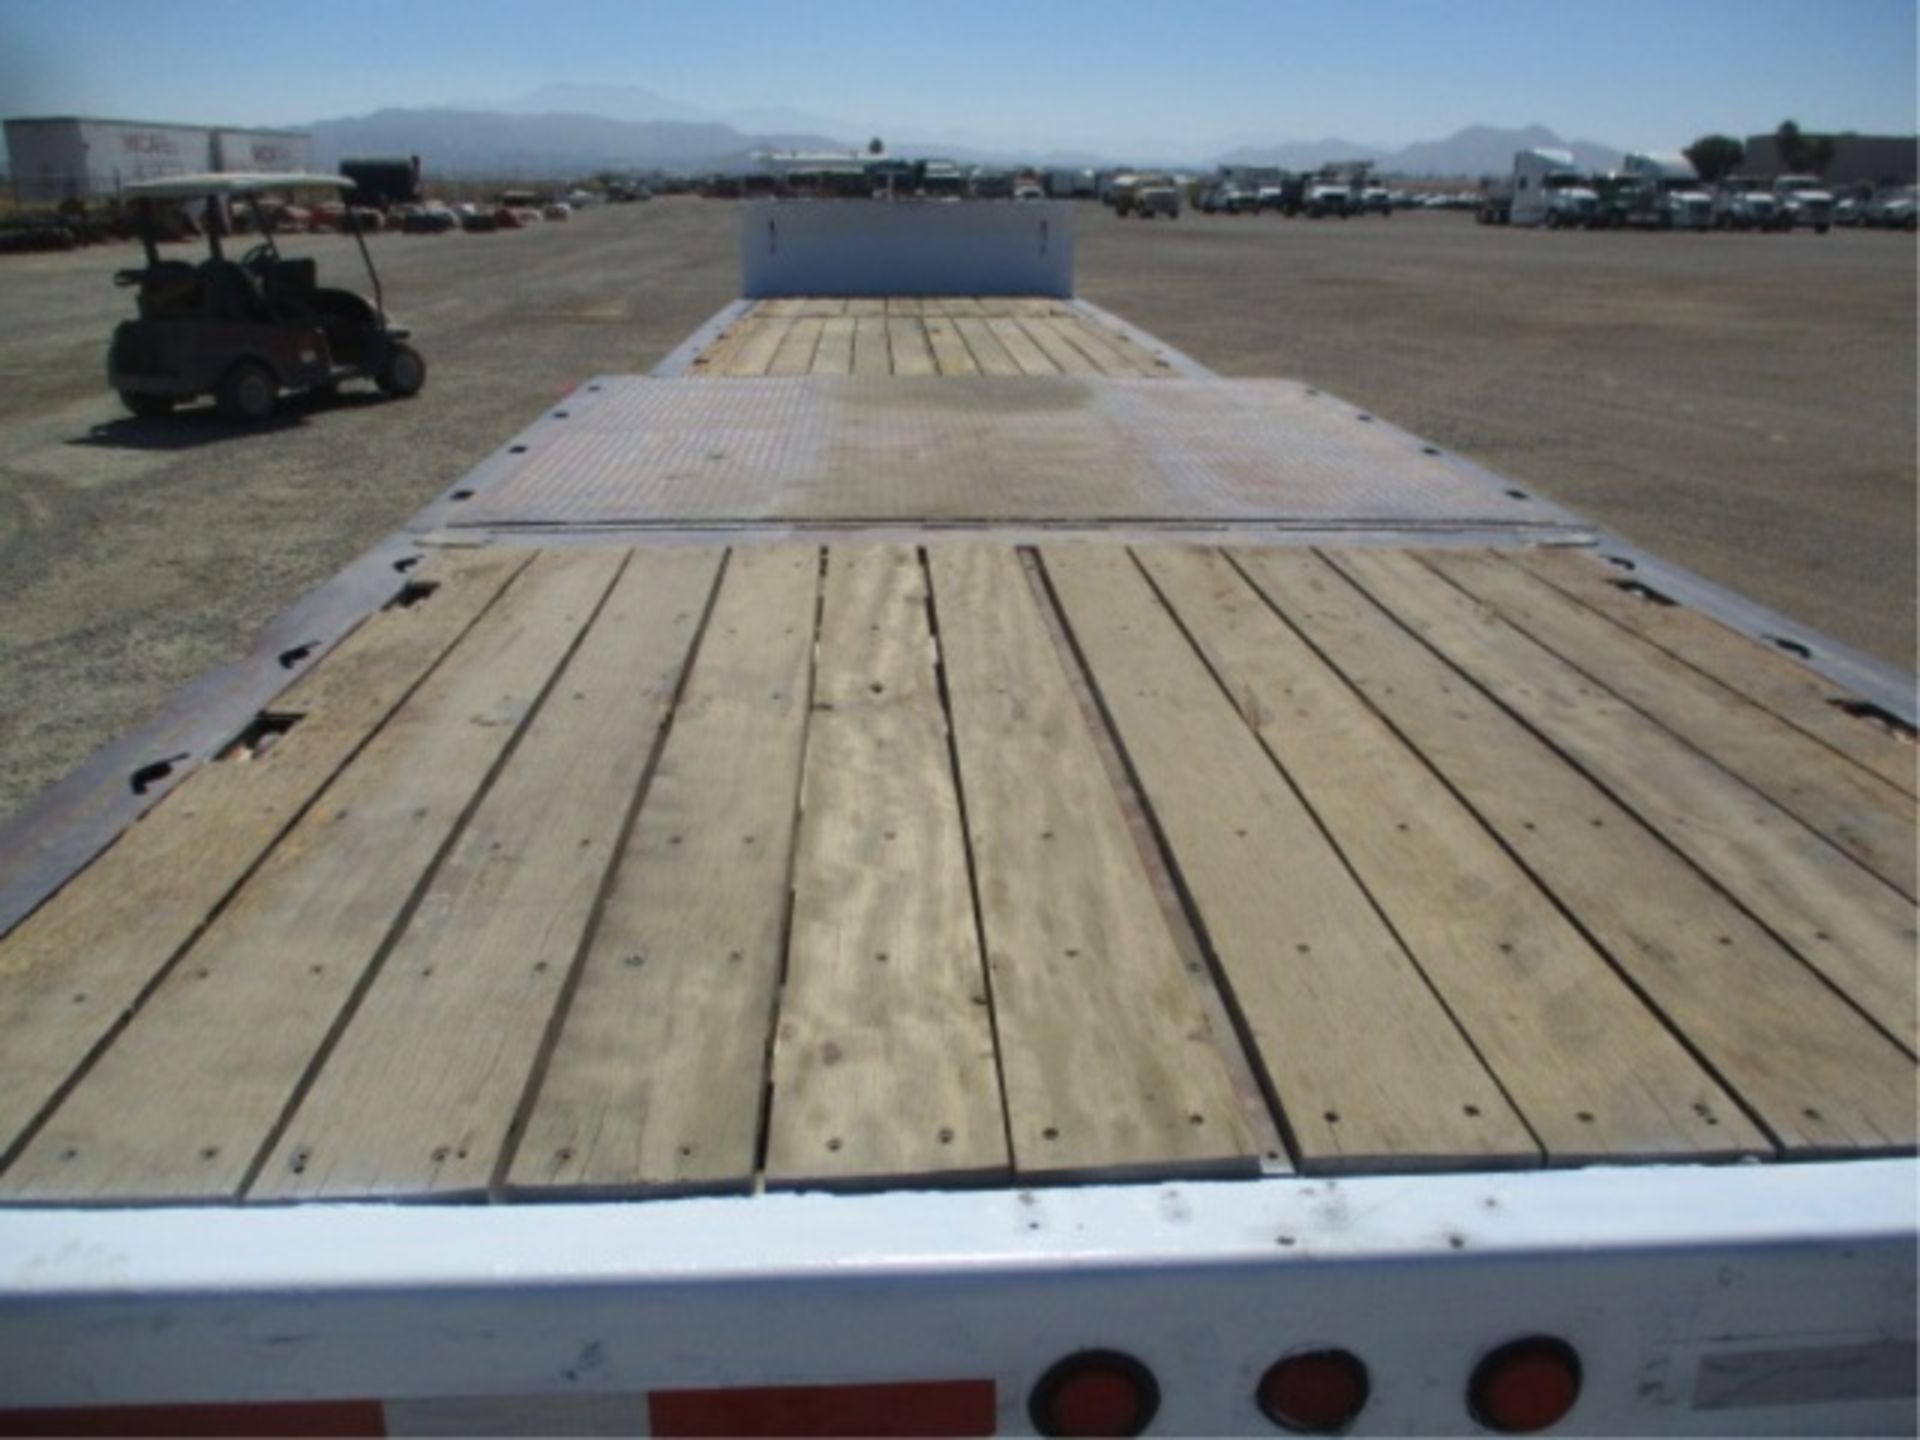 2000 Trail King TK70HT-482 T/A Equipment Trailer, 48', Wood Deck, Hydraulic Dove Tail, 10' Upper - Image 19 of 88